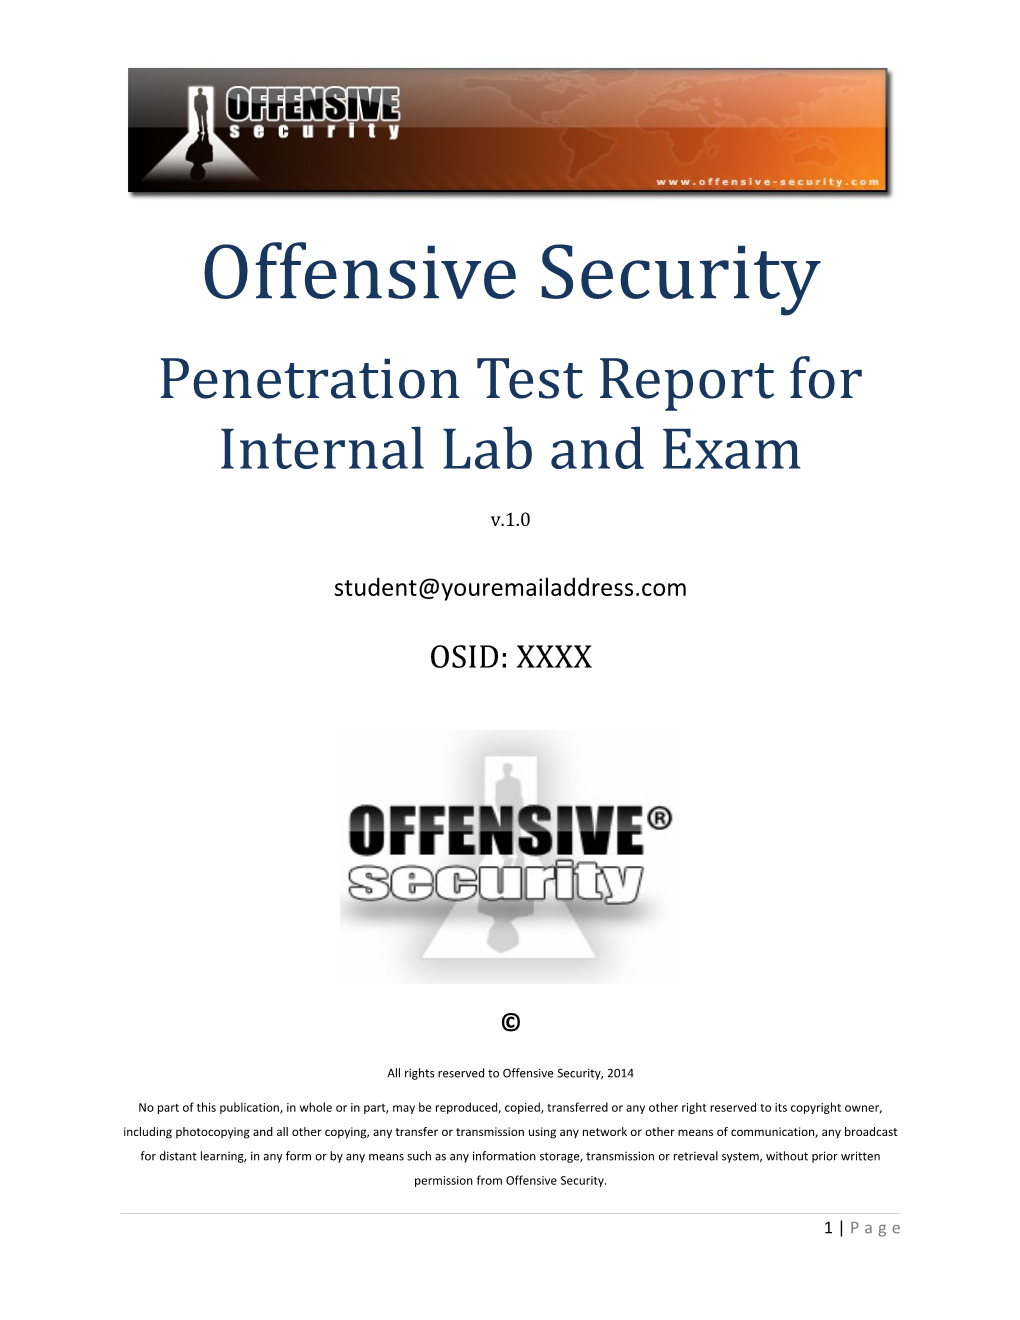 Penetration Test Report for Internal Lab and Exam